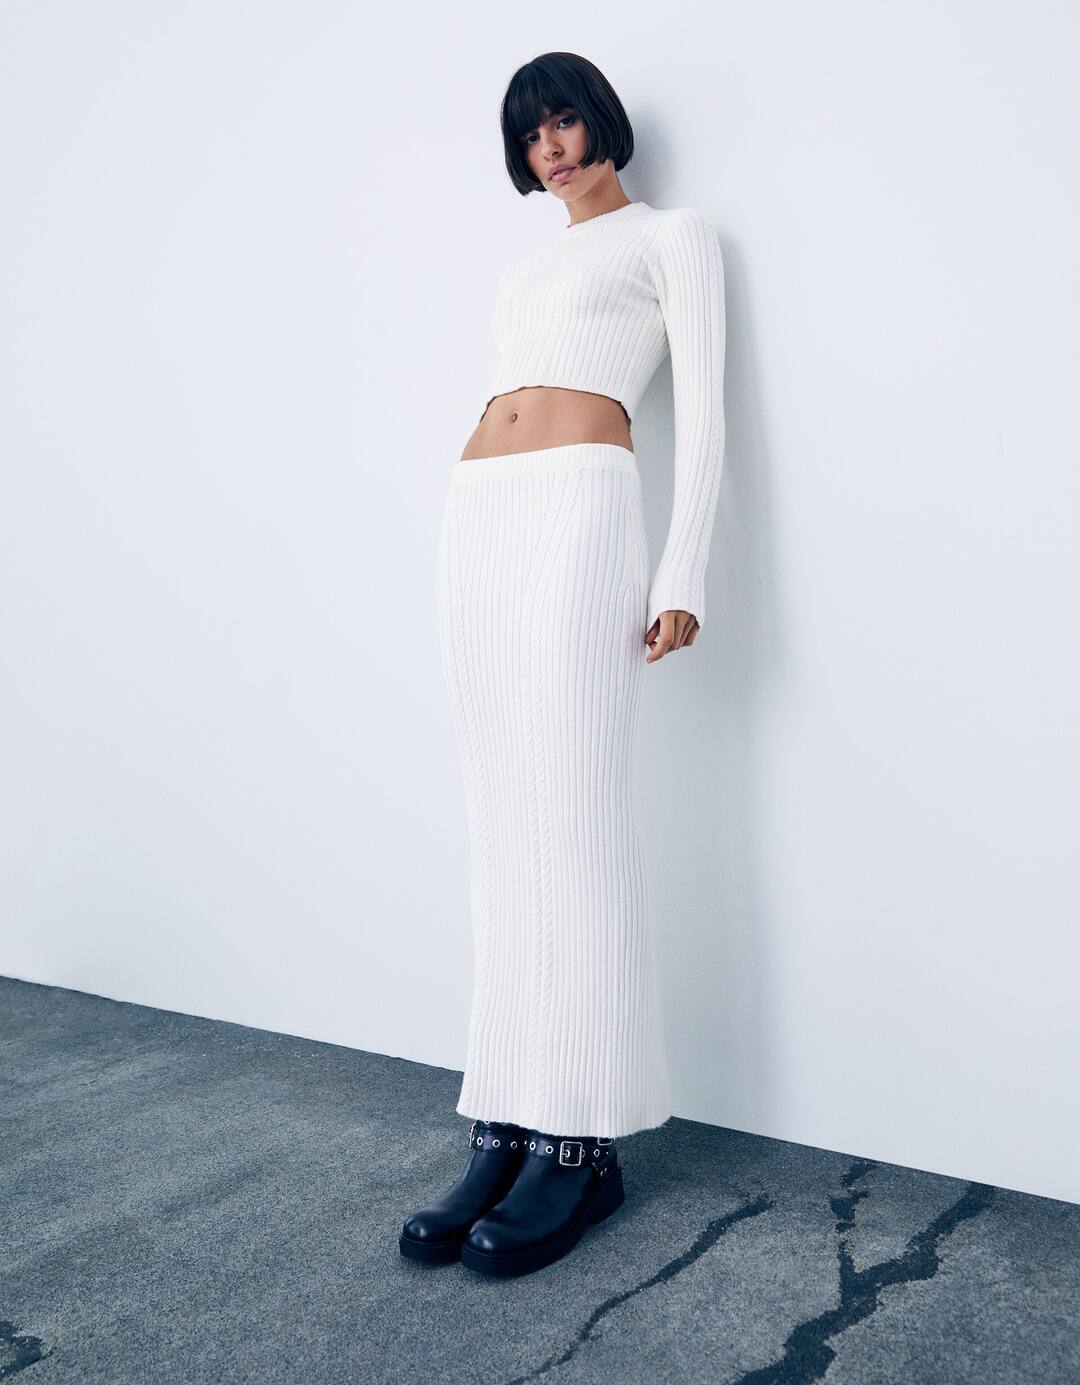 Cable knit sweater and skirt set